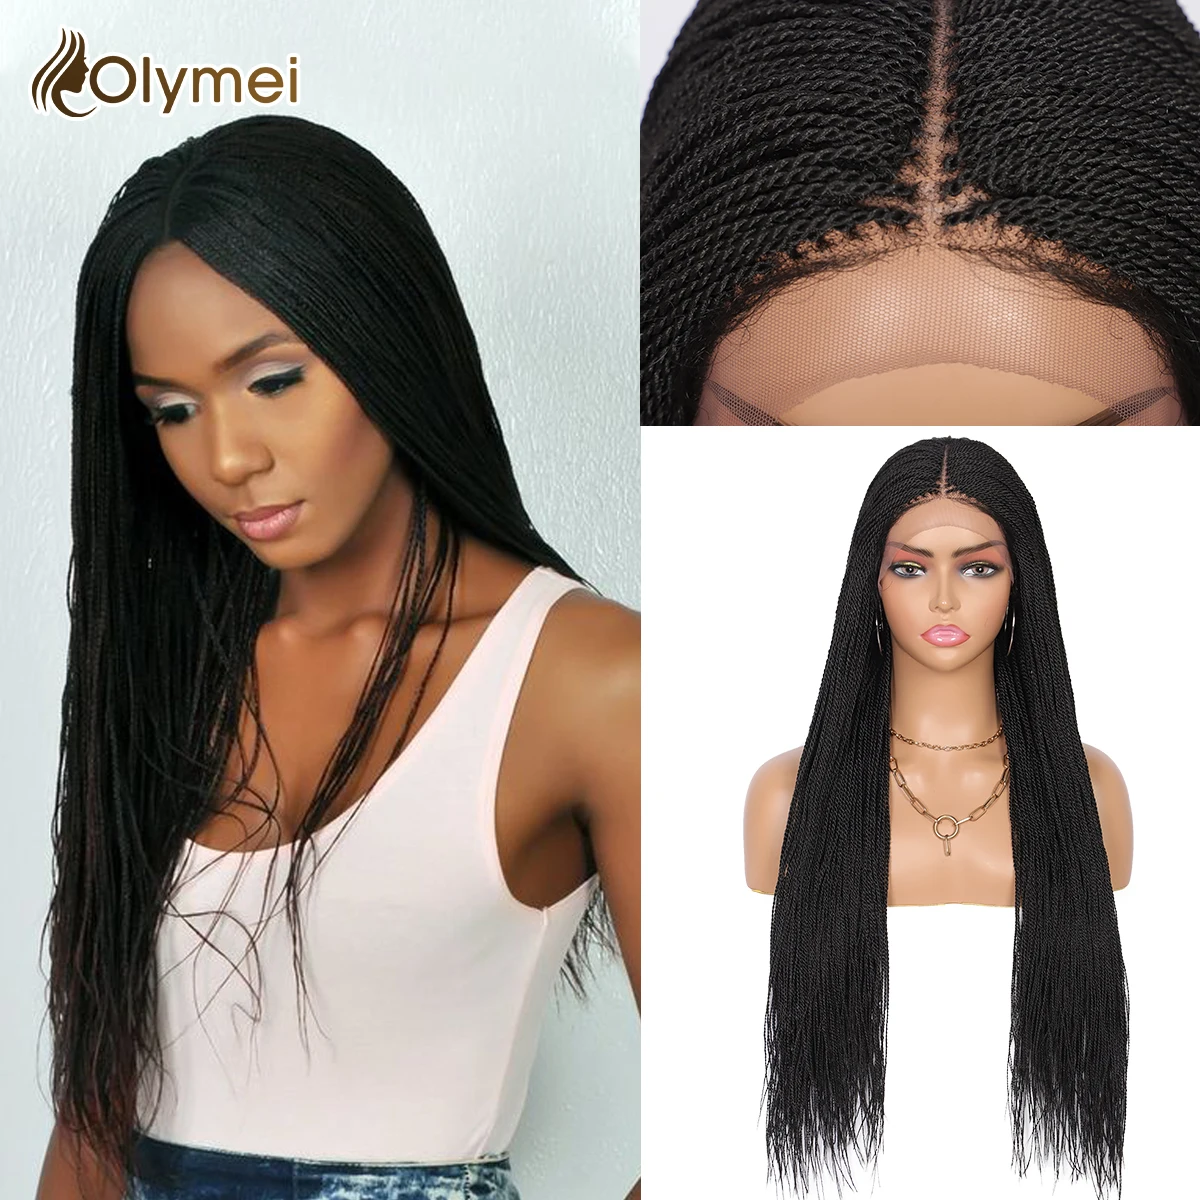 Olymei Synthetic Lace Front Micro Million Twist Braided Wigs with Baby Hair for Black Women Mid Part